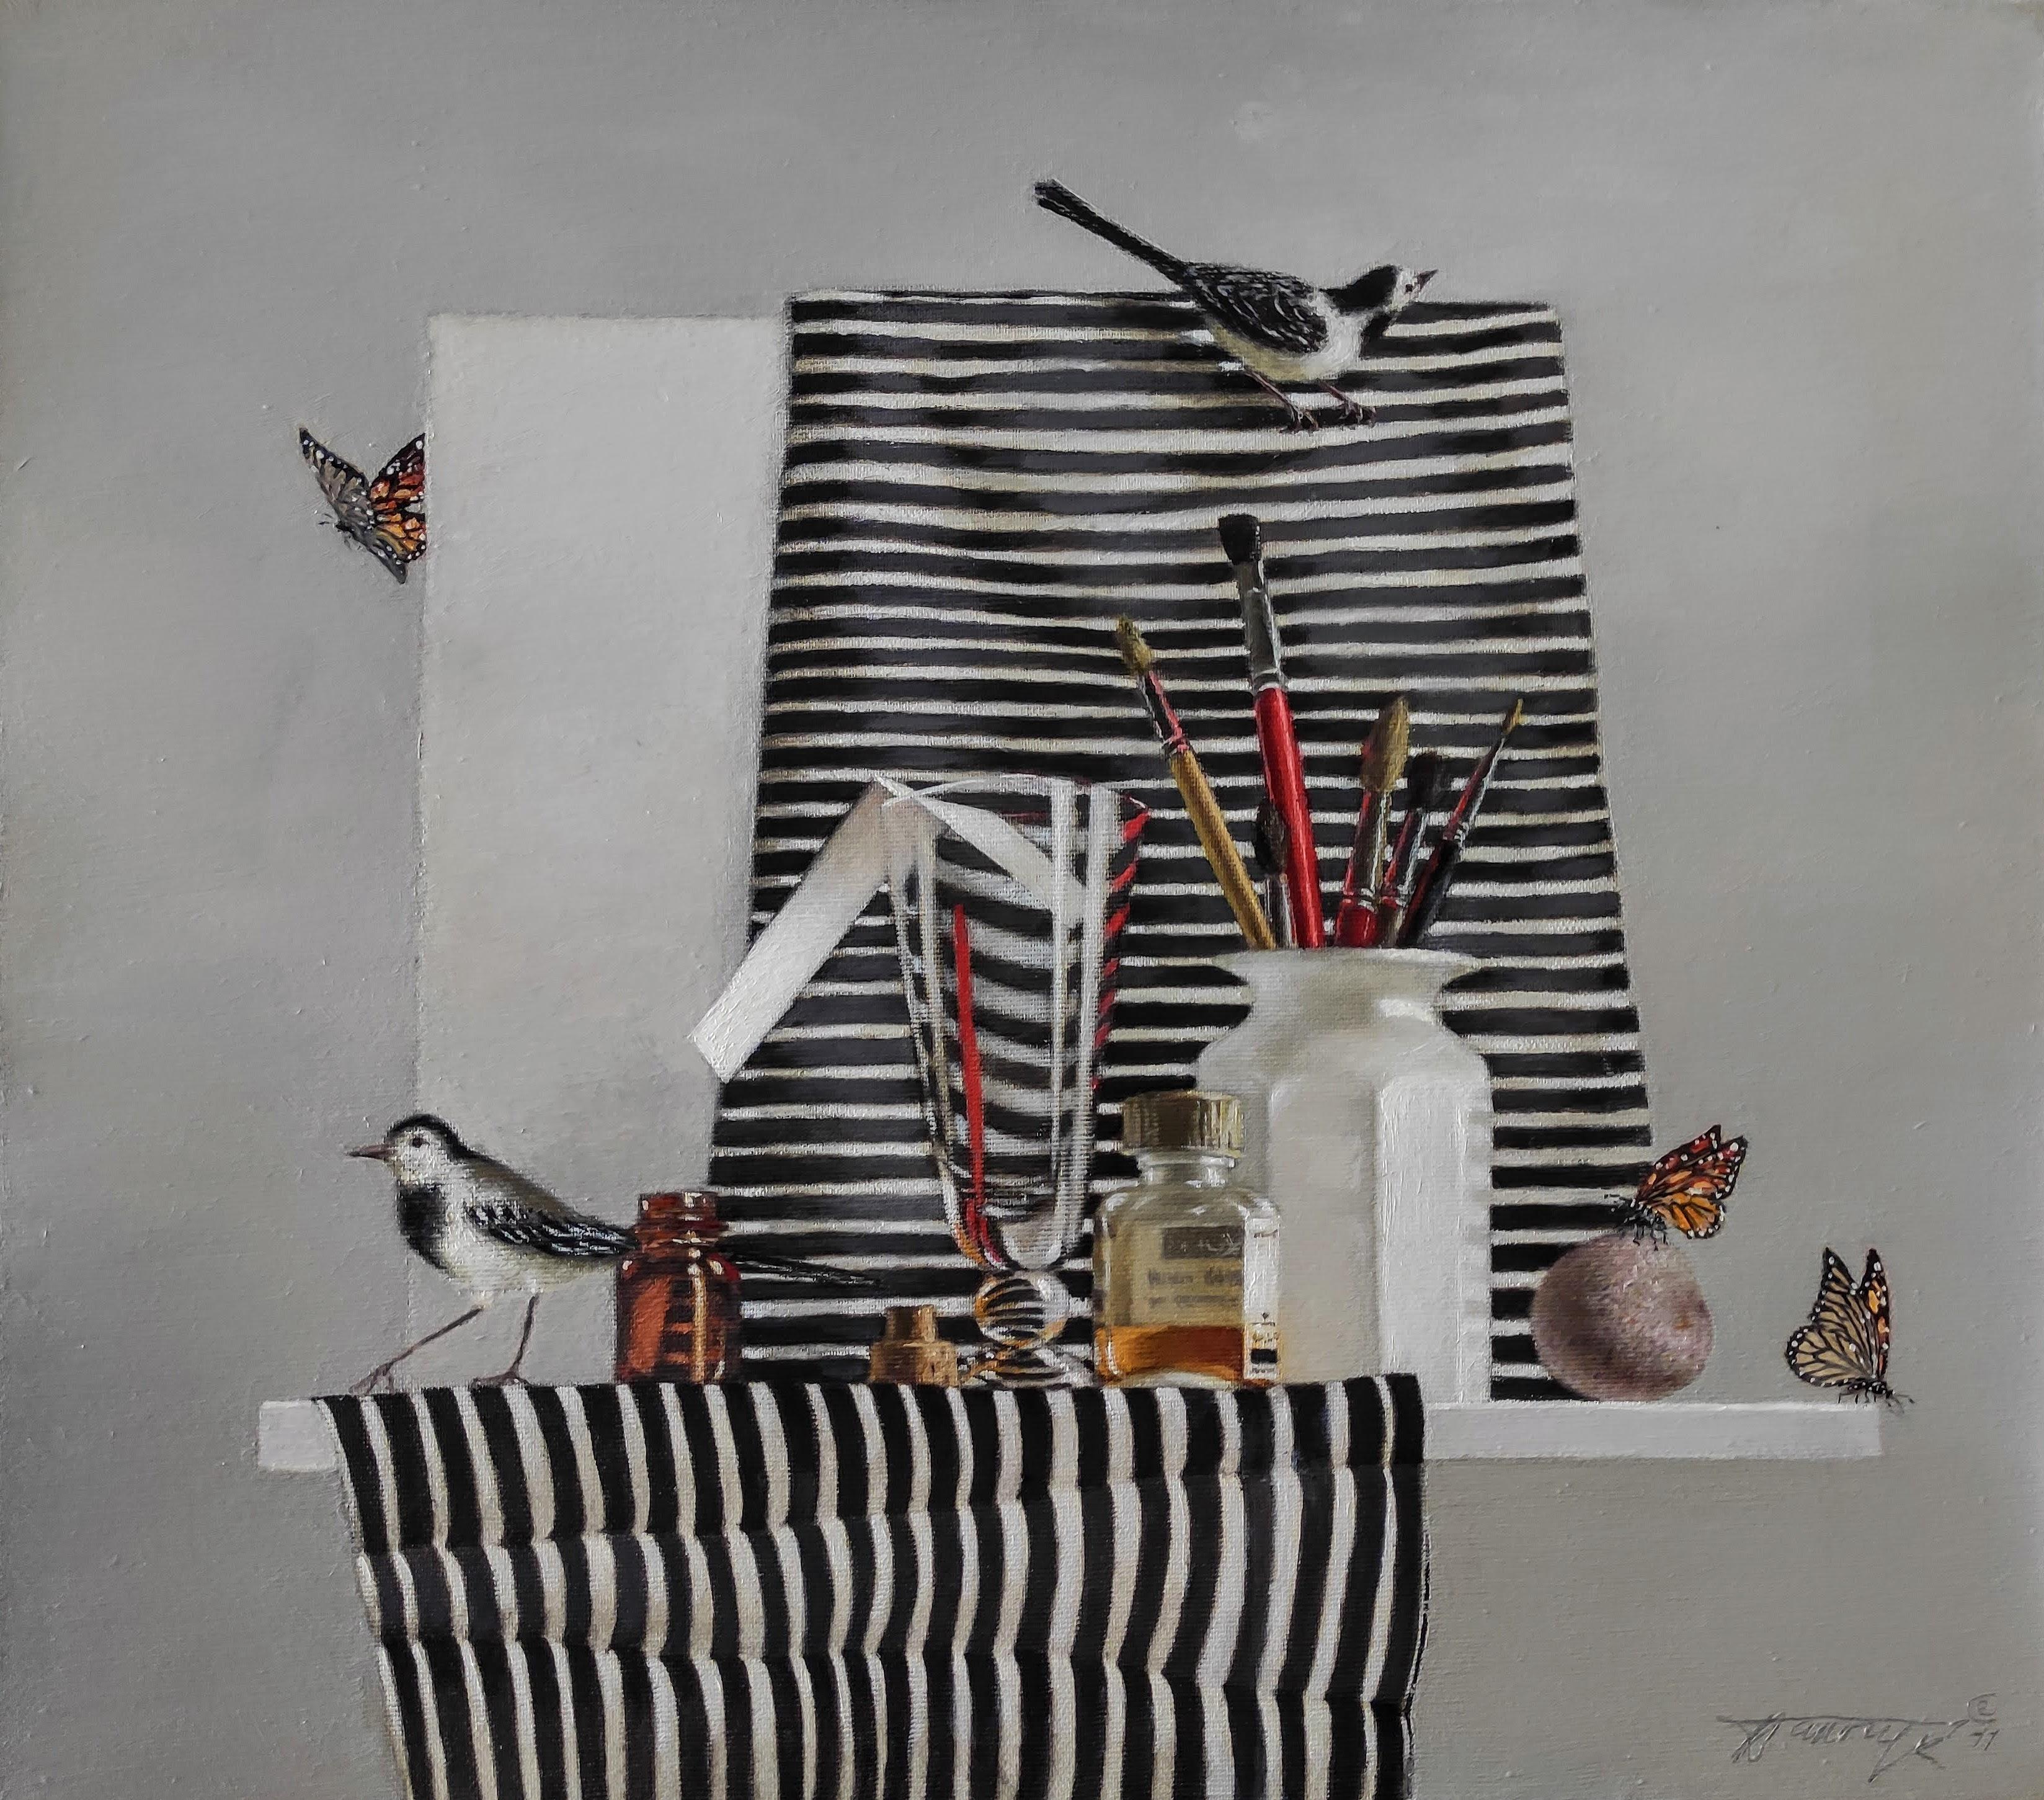 Still Life With Wagtails. 2011. Oil on linen, 40X45 cm